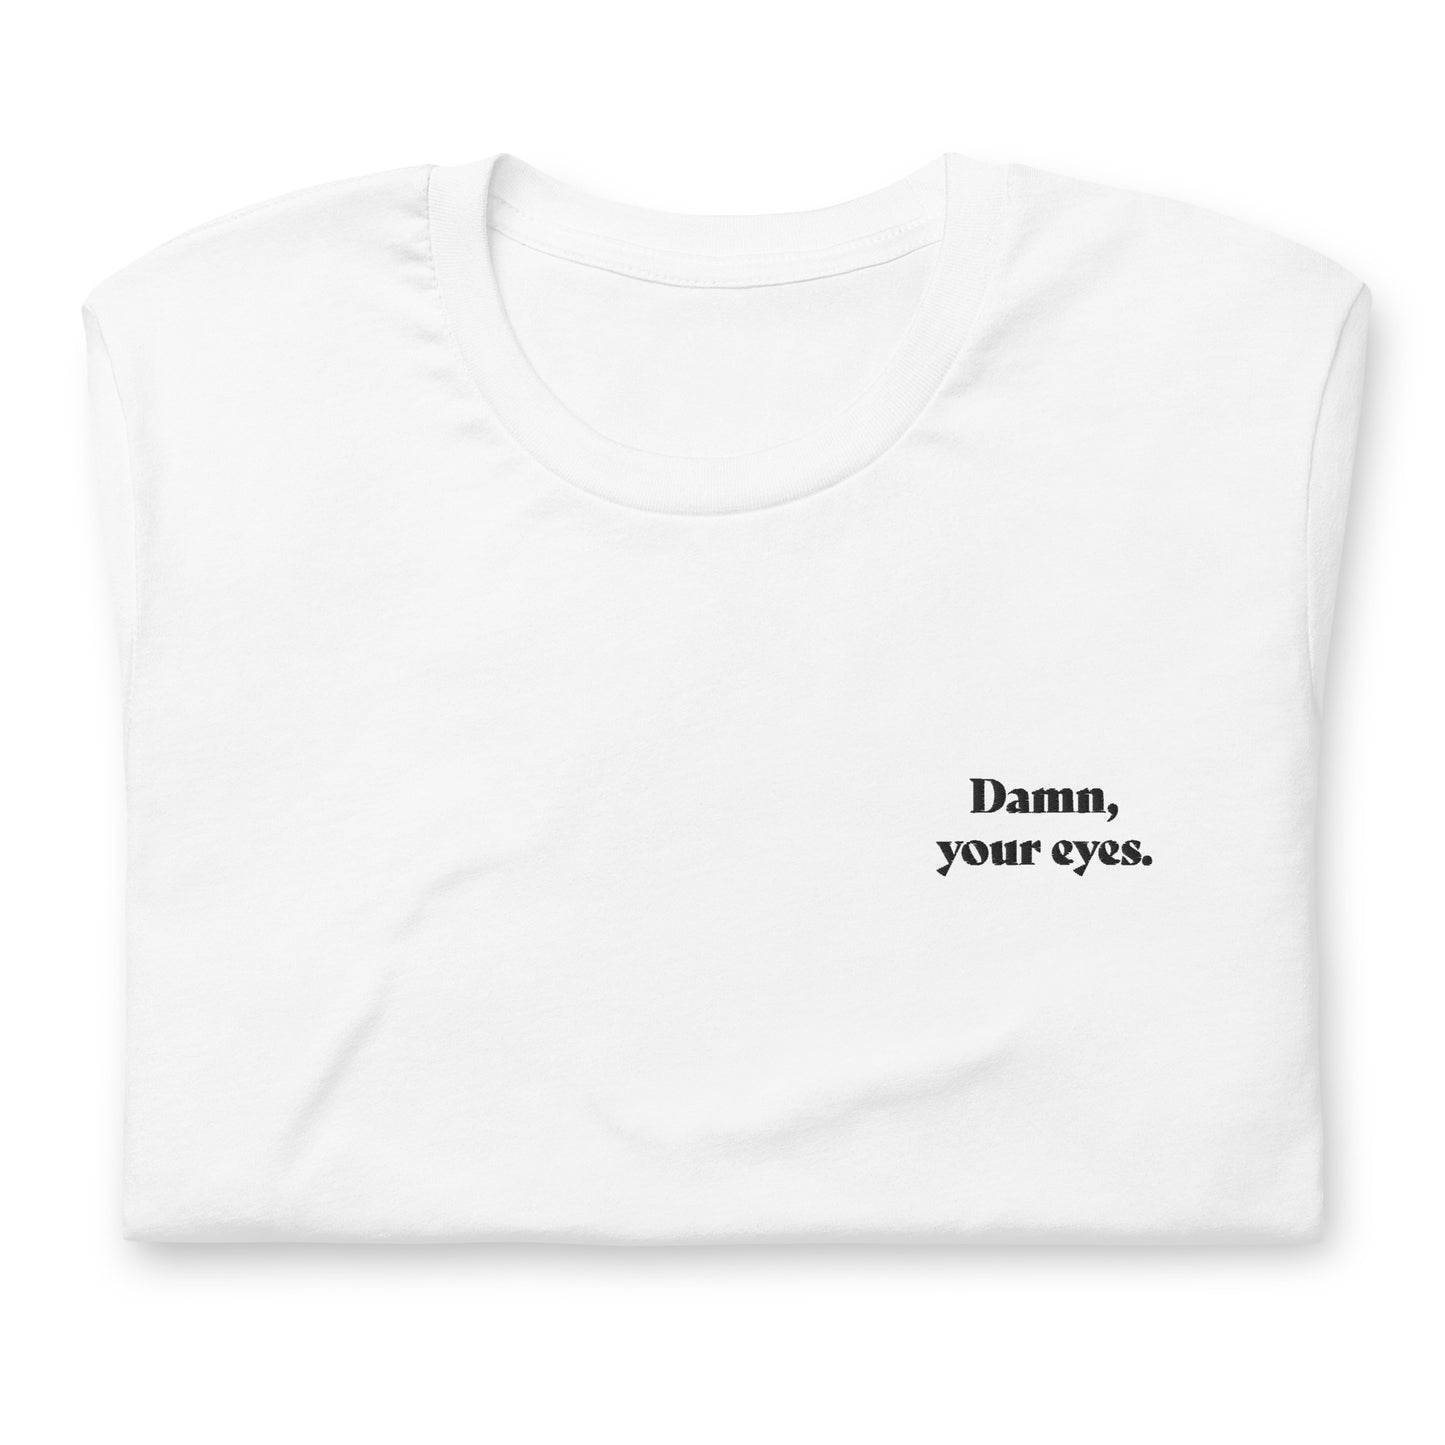 Dawn, your eyes. - embroidered T-shirt